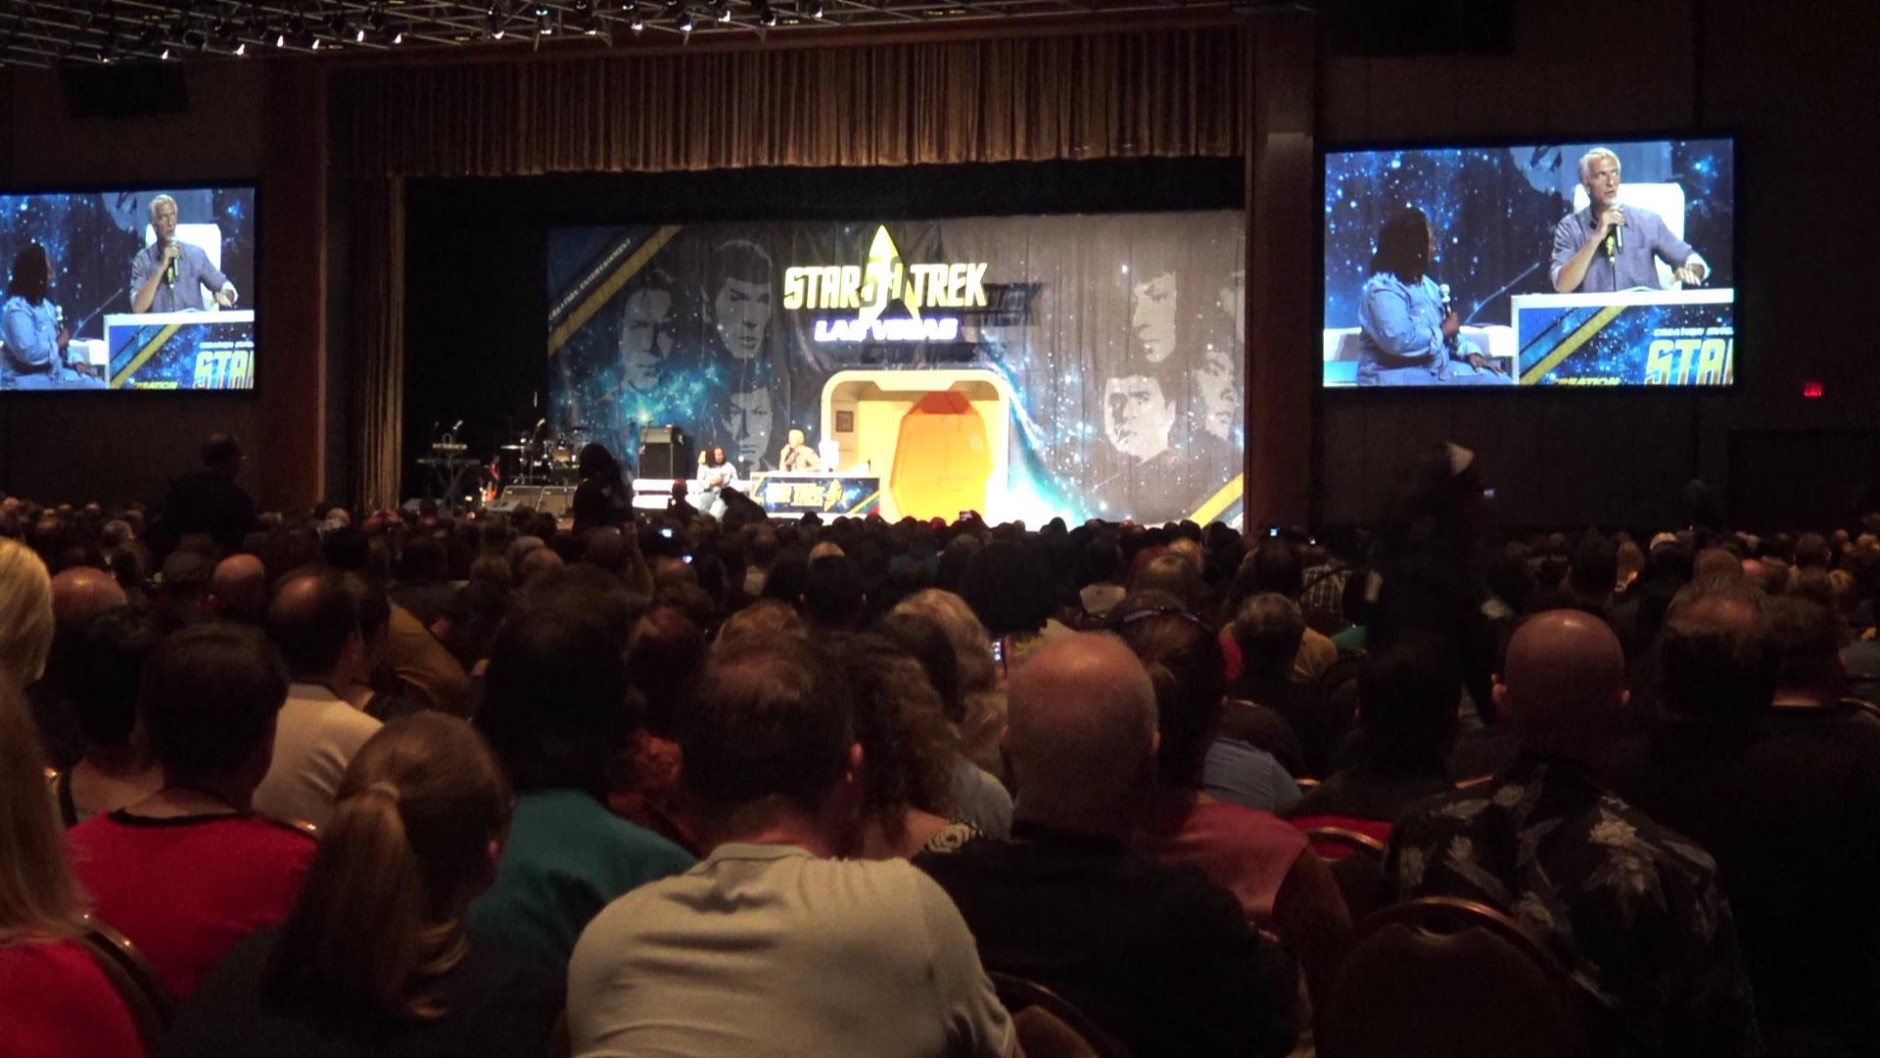 The Whoopi Goldberg stage presentation at the Star Trek 50 convention. (WTOP/Kenny Fried)